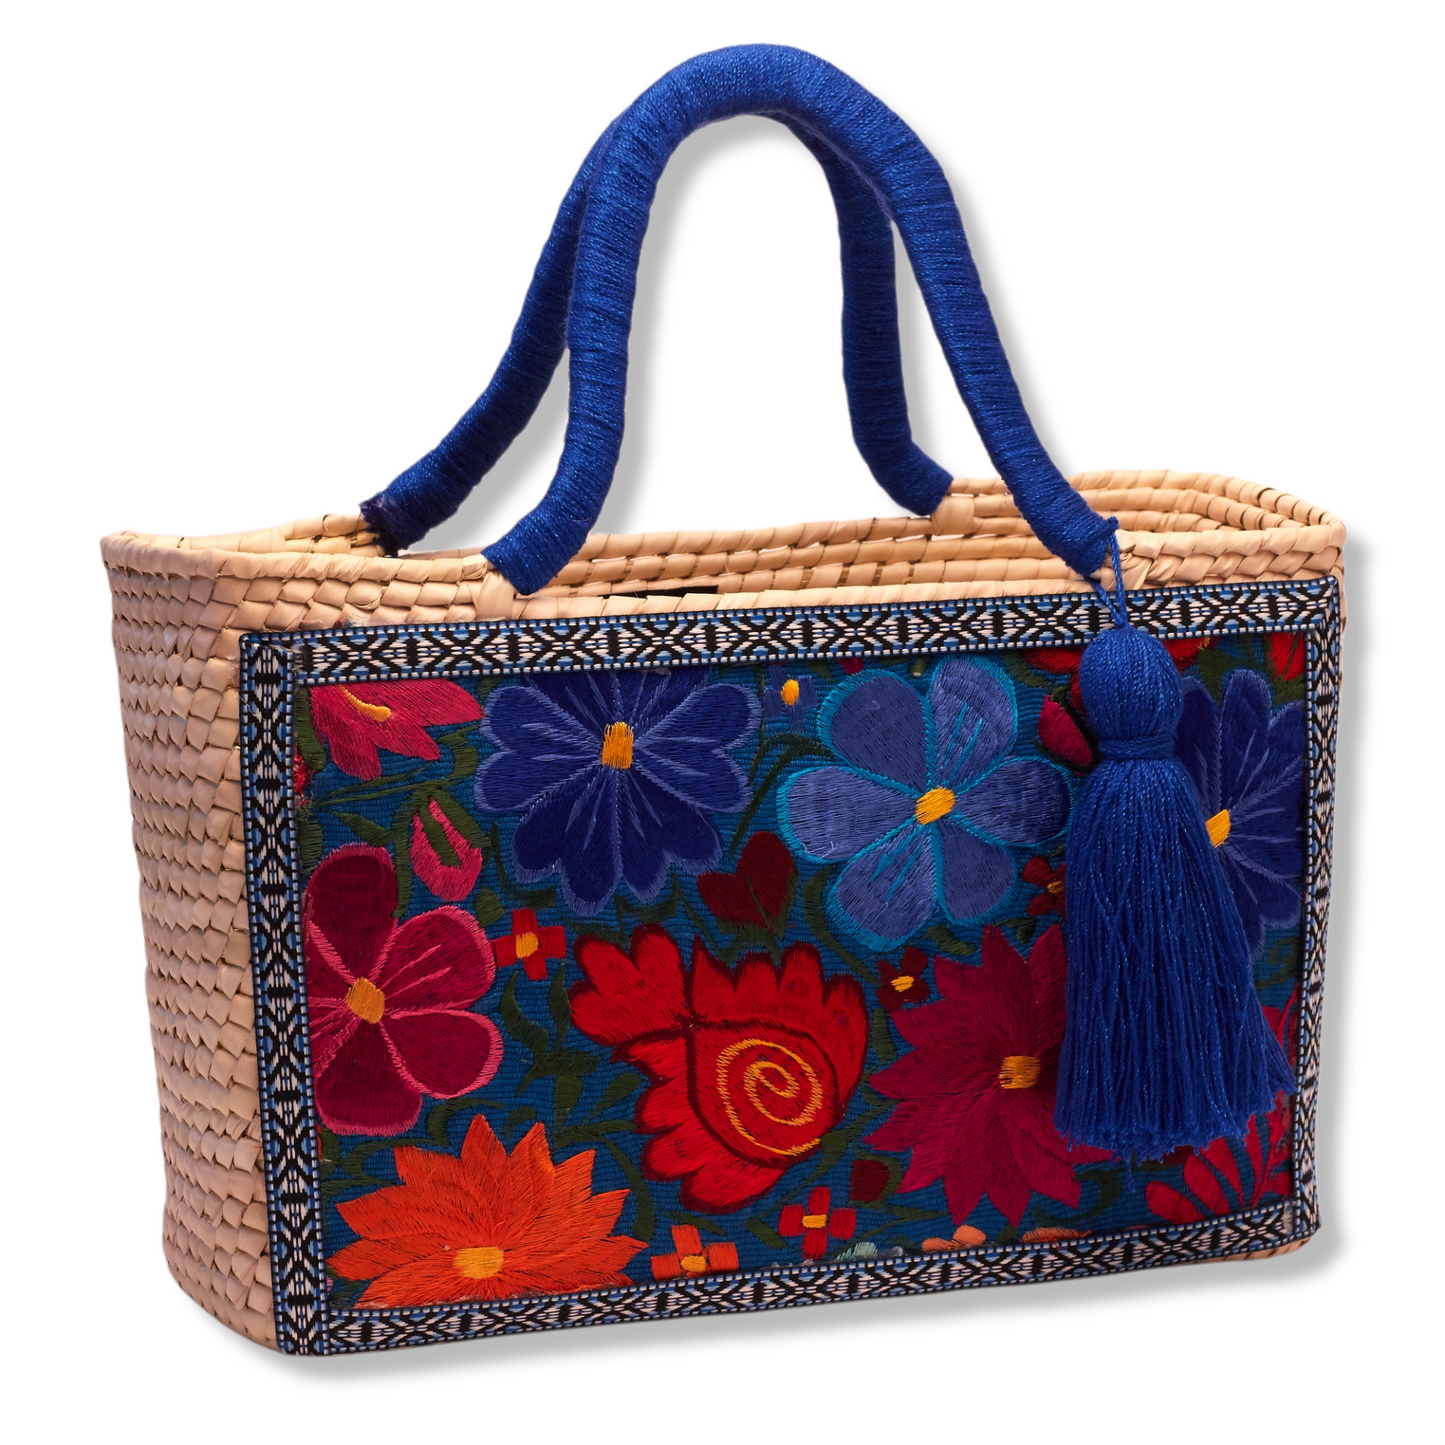 Embroidered rectangle tote/ bag